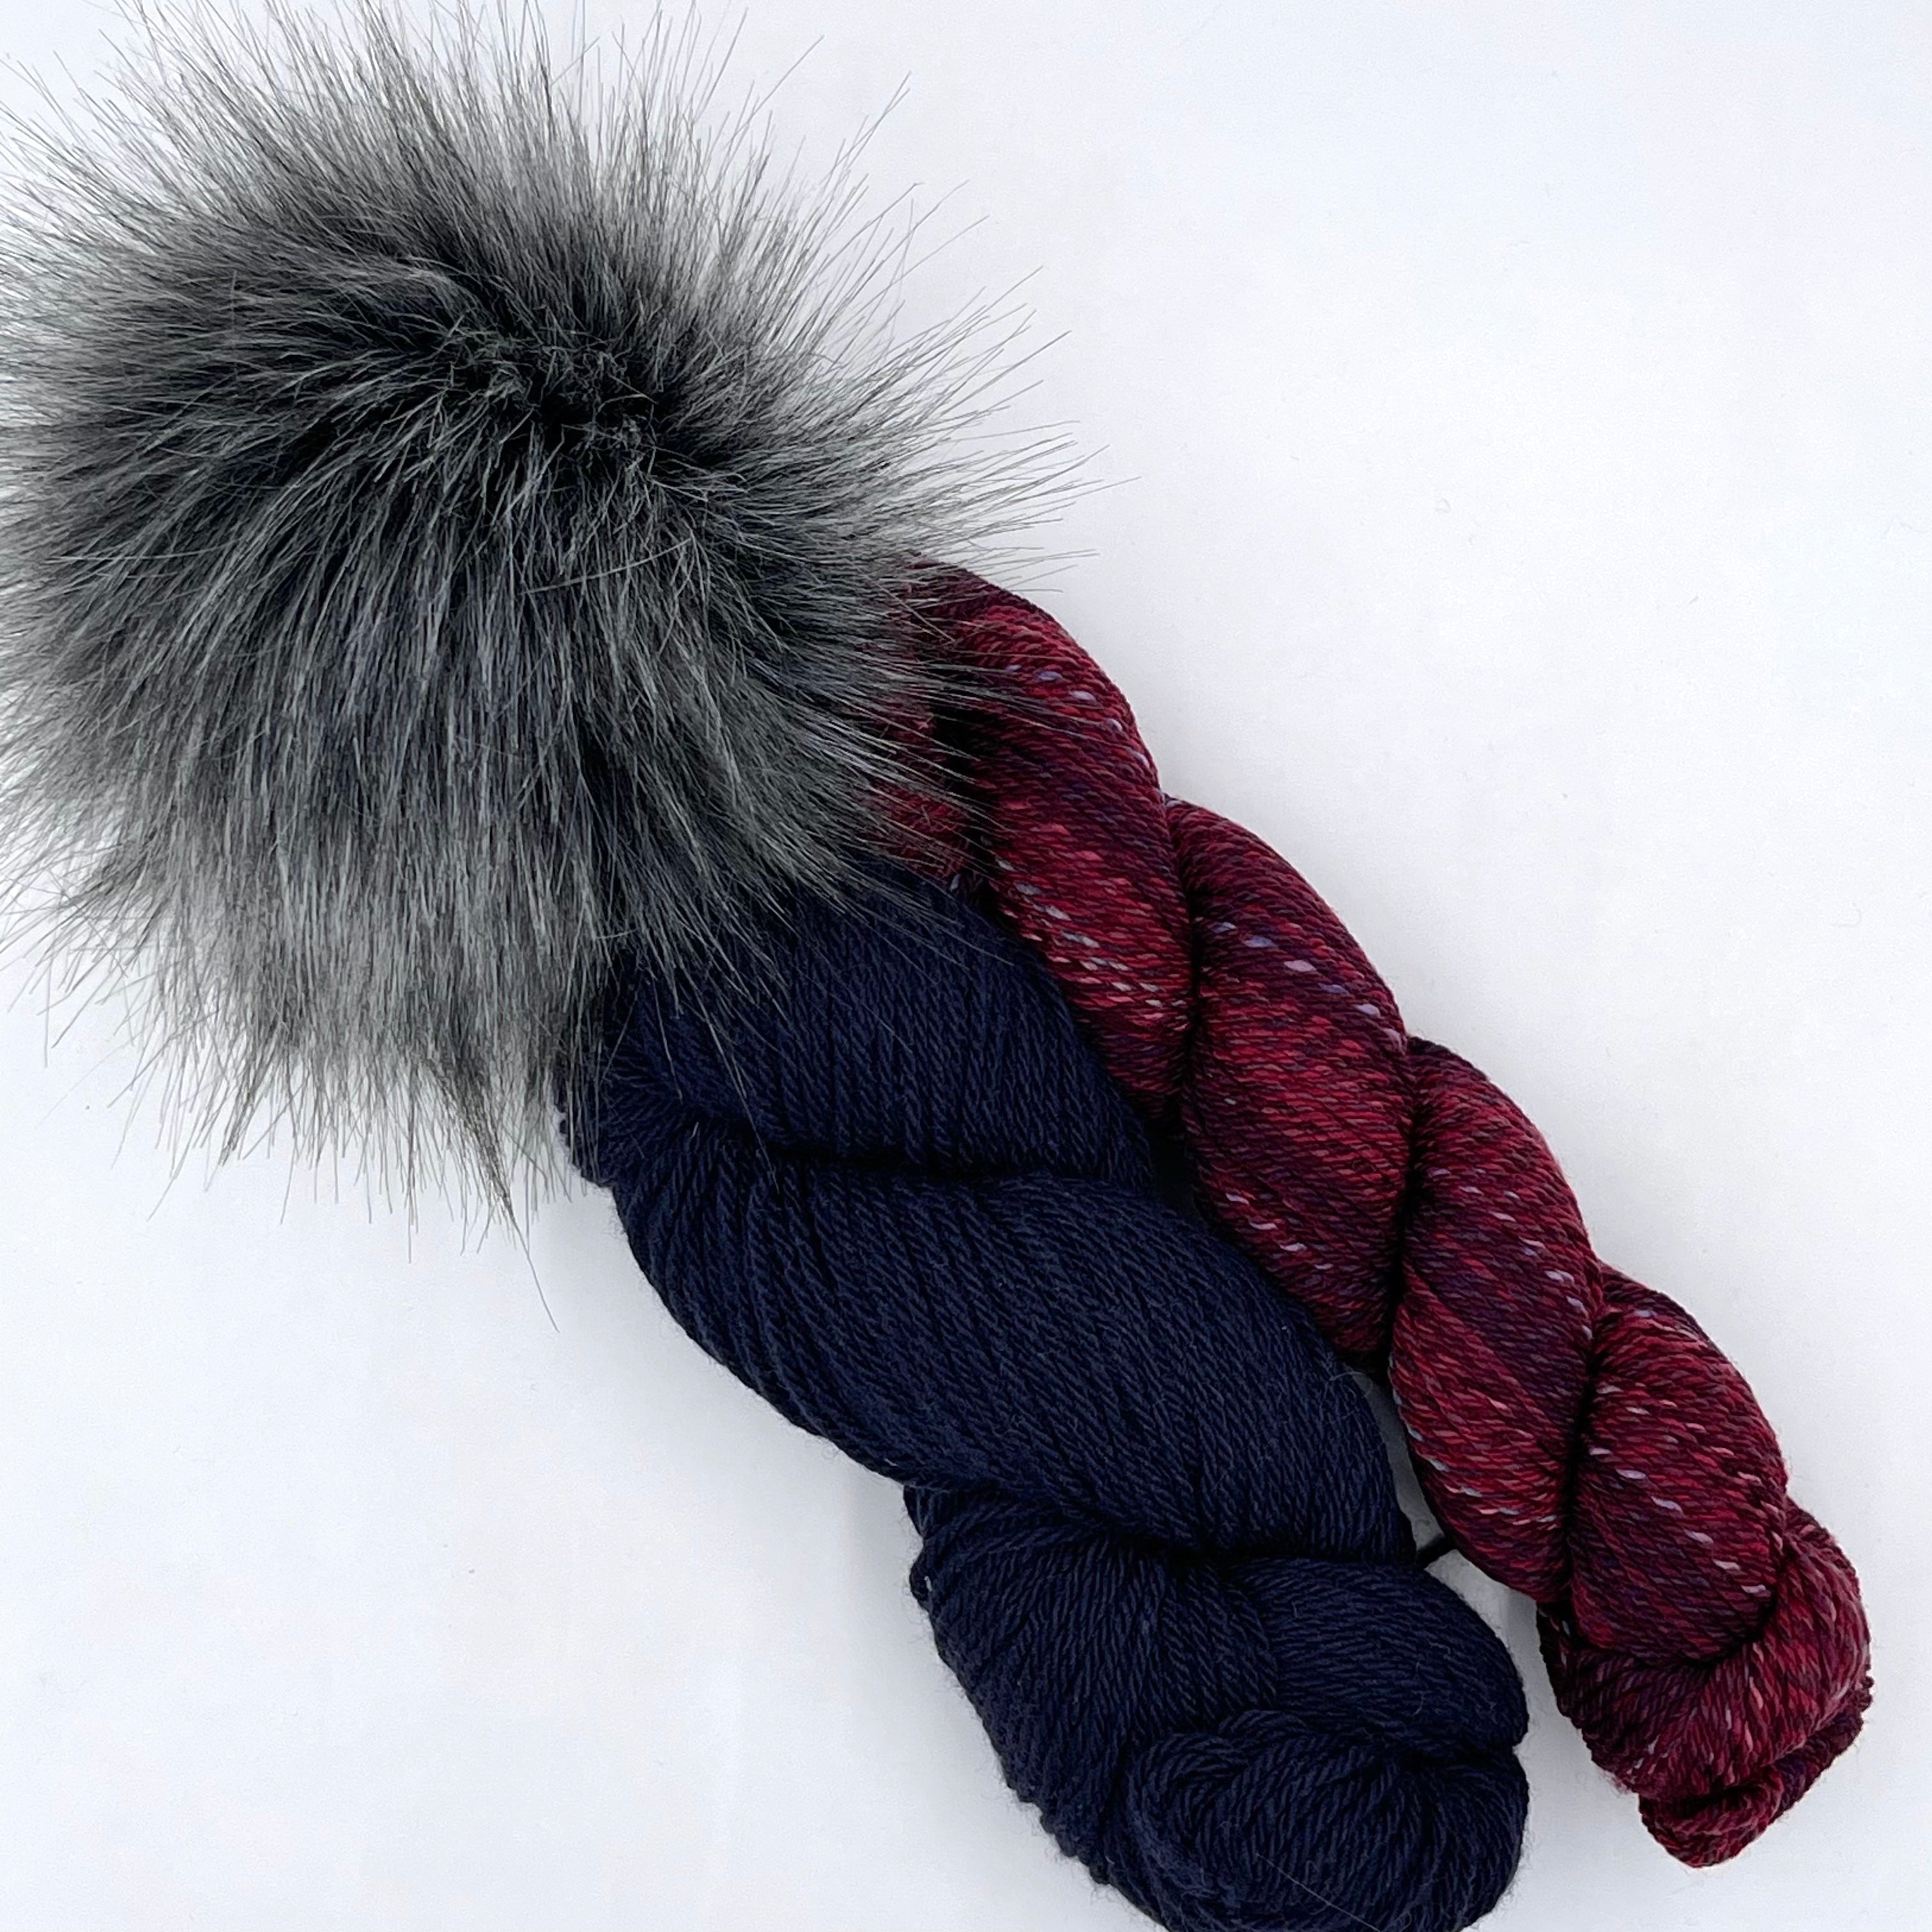 Flicker & Flame Hat Kit - Worsted Weight